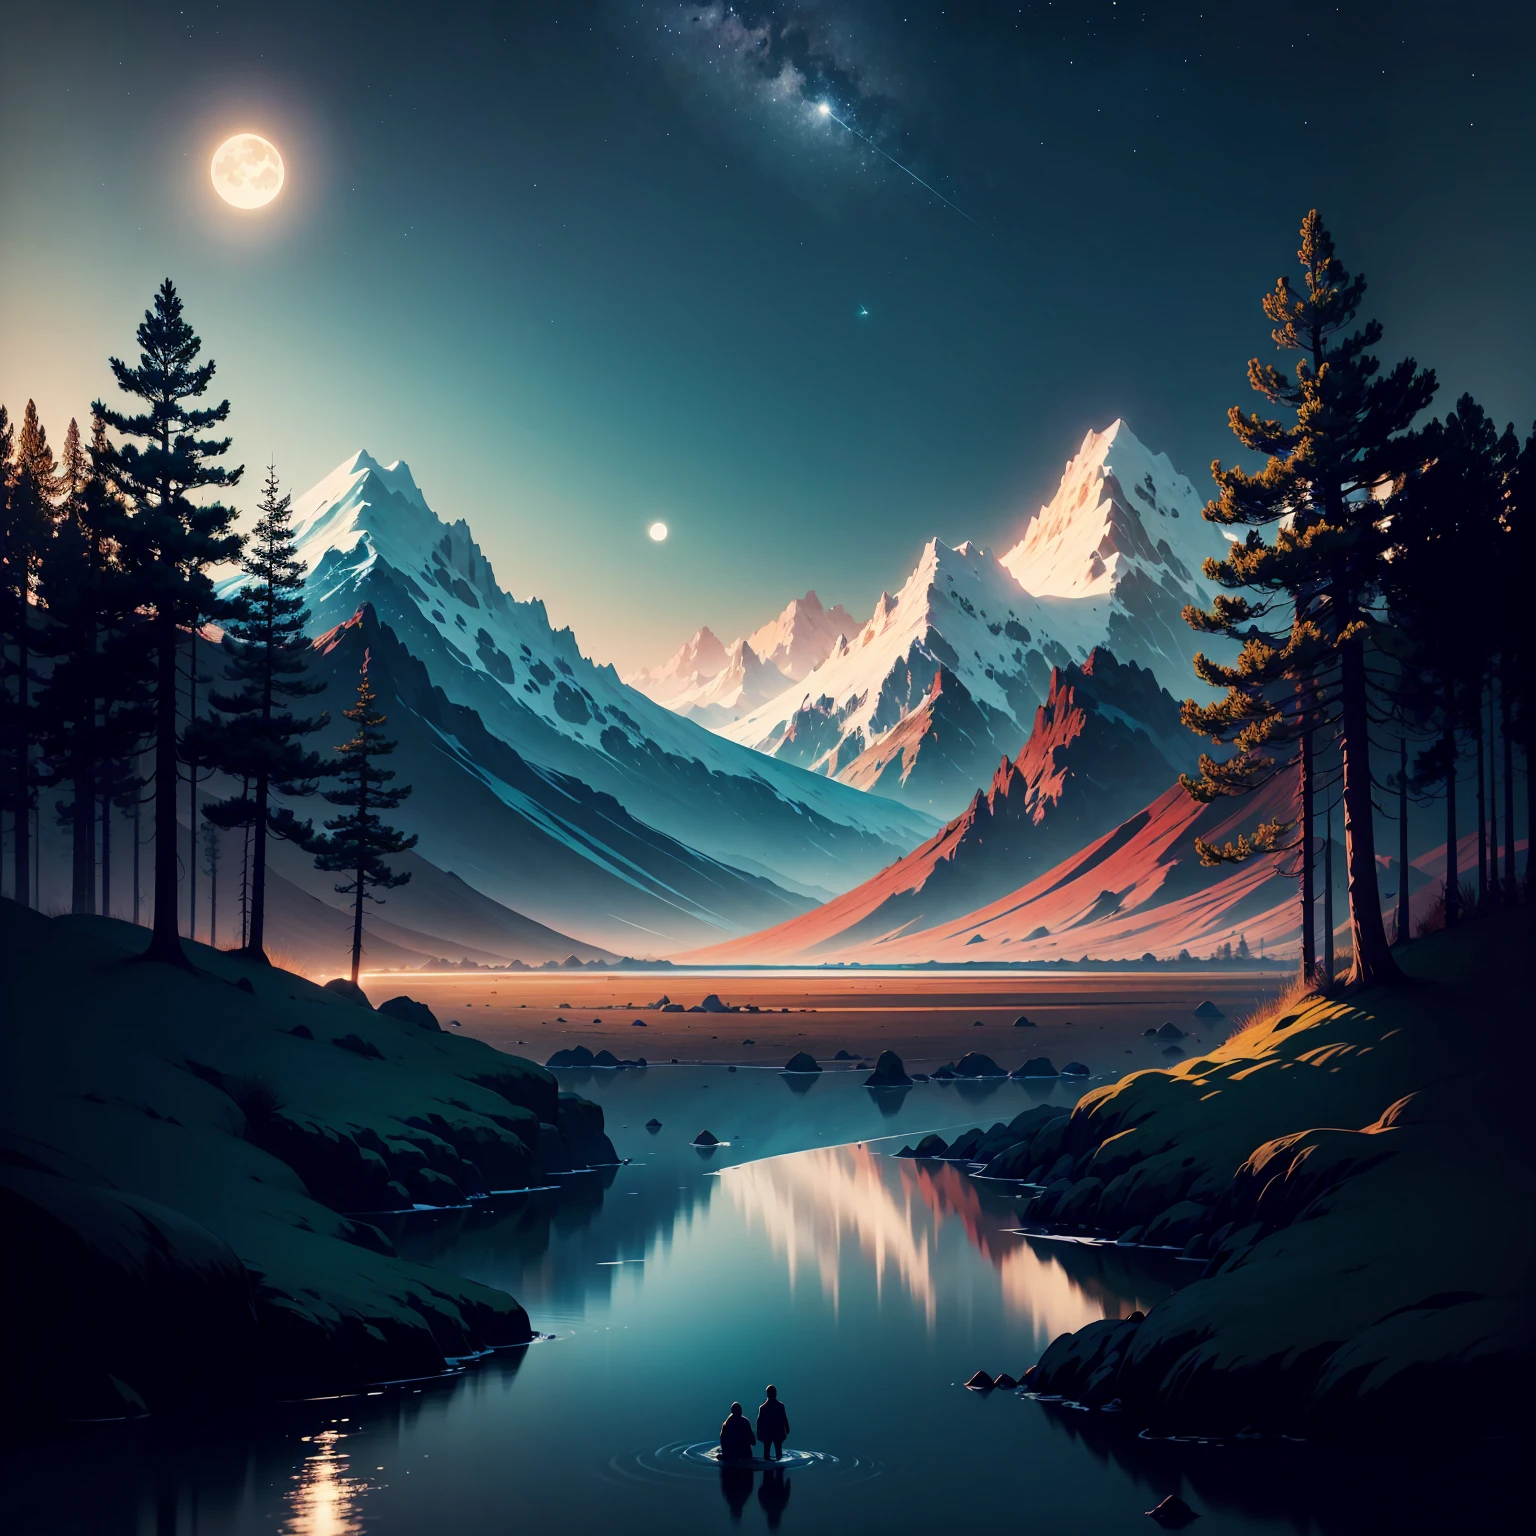 Here is a description of the scene in the style of a Japanese adventure animation: The screen opens up to a breathtaking landscape, with towering mountains in the background and a night sky dotted with twinkling stars. The environment is wrapped in a magical and serene atmosphere, while a gentle breeze swings the grass and trees. In the background we see a hill, the horizon illuminated by the full and radiant moon. The moon emits an intense silver glow, bathing the landscape in a soft, mysterious light. The reflection of the moon is reflected in the character's eyes, bringing an air of wonder and desire for discovery. The wind subtly blows the trees, giving movement and dynamism to the scene. The entire scene is animated with vibrant colors and subtle contrasts, highlighting the beauty of the scenery and the aura of mystery of the moon.
The soft soundtrack, with traditional Japanese instruments, echoes in the background,
increasing the sense of impending adventure.
This Japanese animated scene captures the excitement and grandeur of an epic journey, as the main character faces the moonlit horizon, Ready to embark on an incredible adventure full of challenges and discoveries.